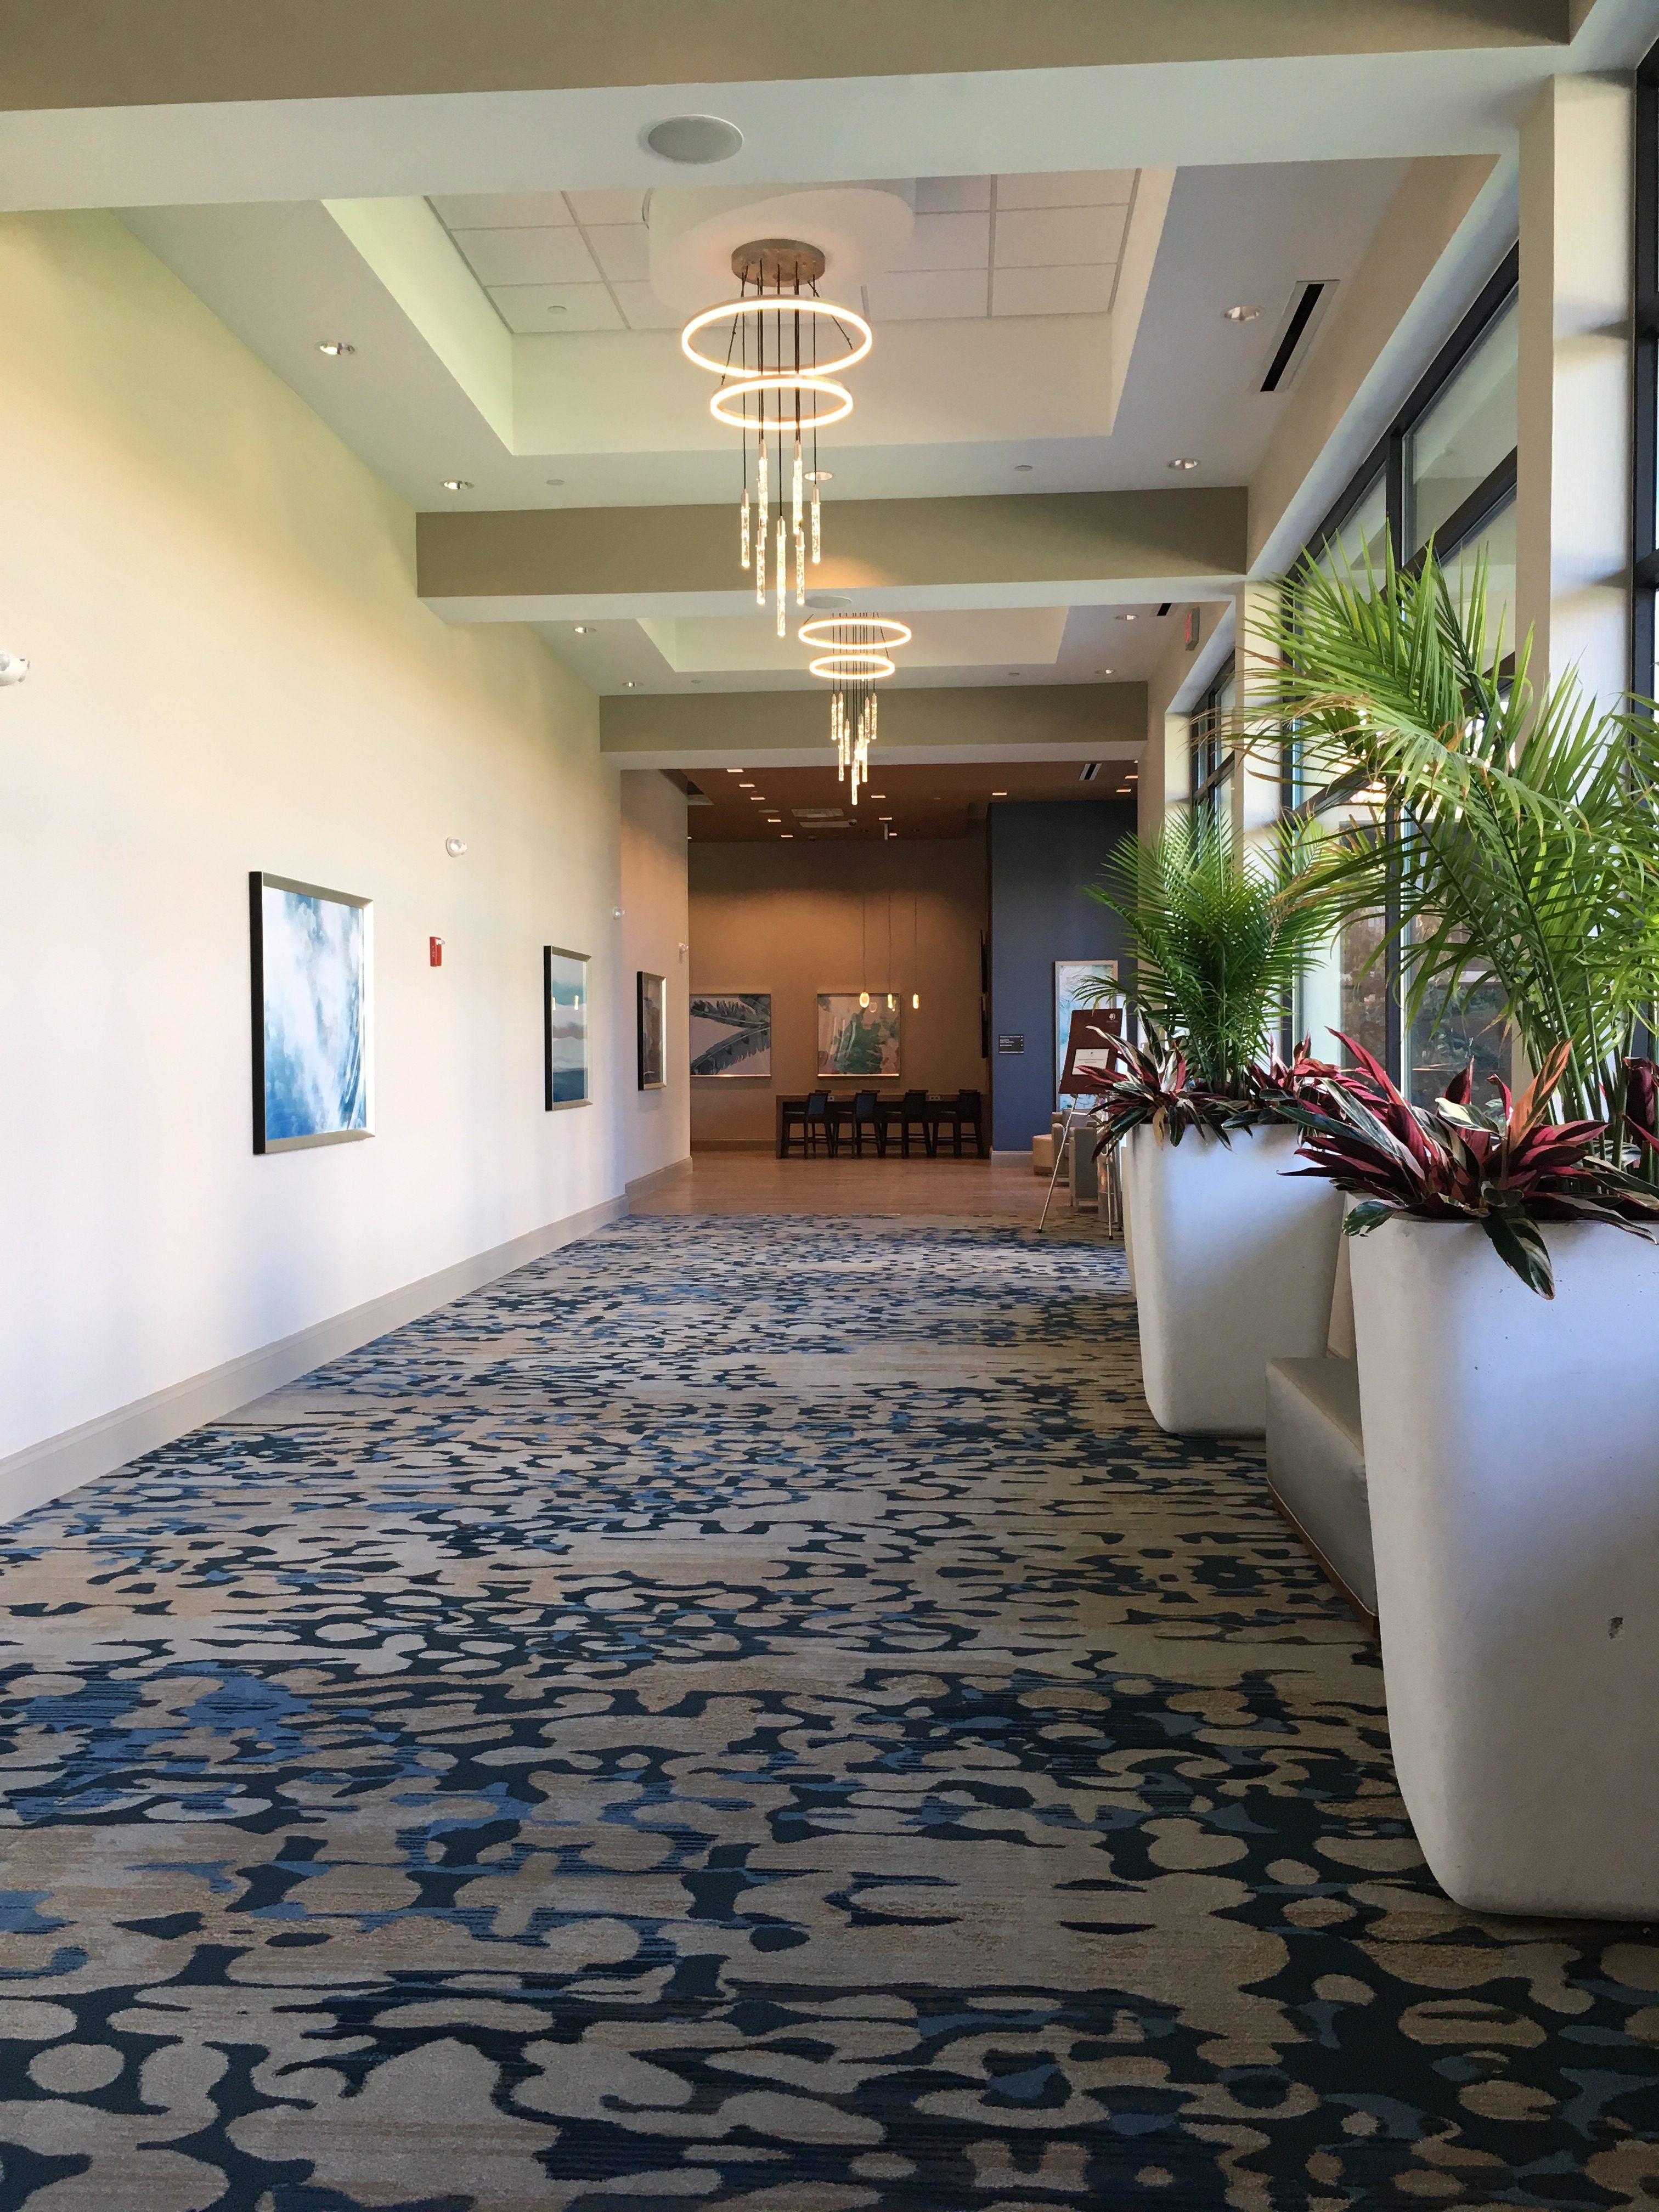 Doubletree By Hilton Orlando At Seaworld - A New Luxury Budget Friendly Option In Orlando